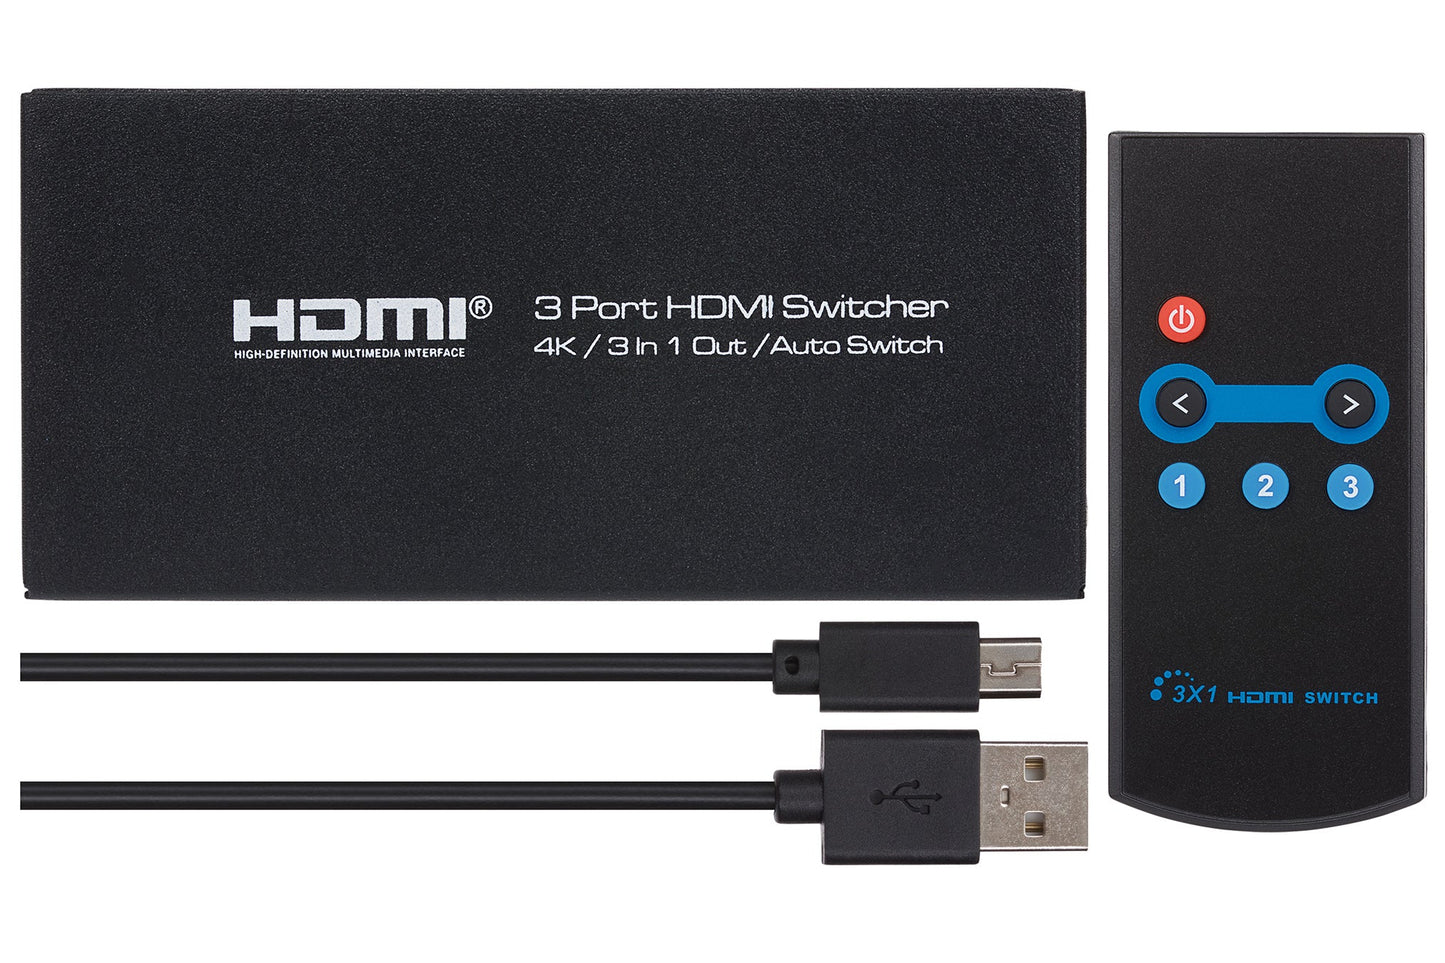 Maplin MPS HDMI Switch 3 Ports In 1 Port Out 4K Ultra HD @30Hz with Remote Control - Black - maplin.co.uk